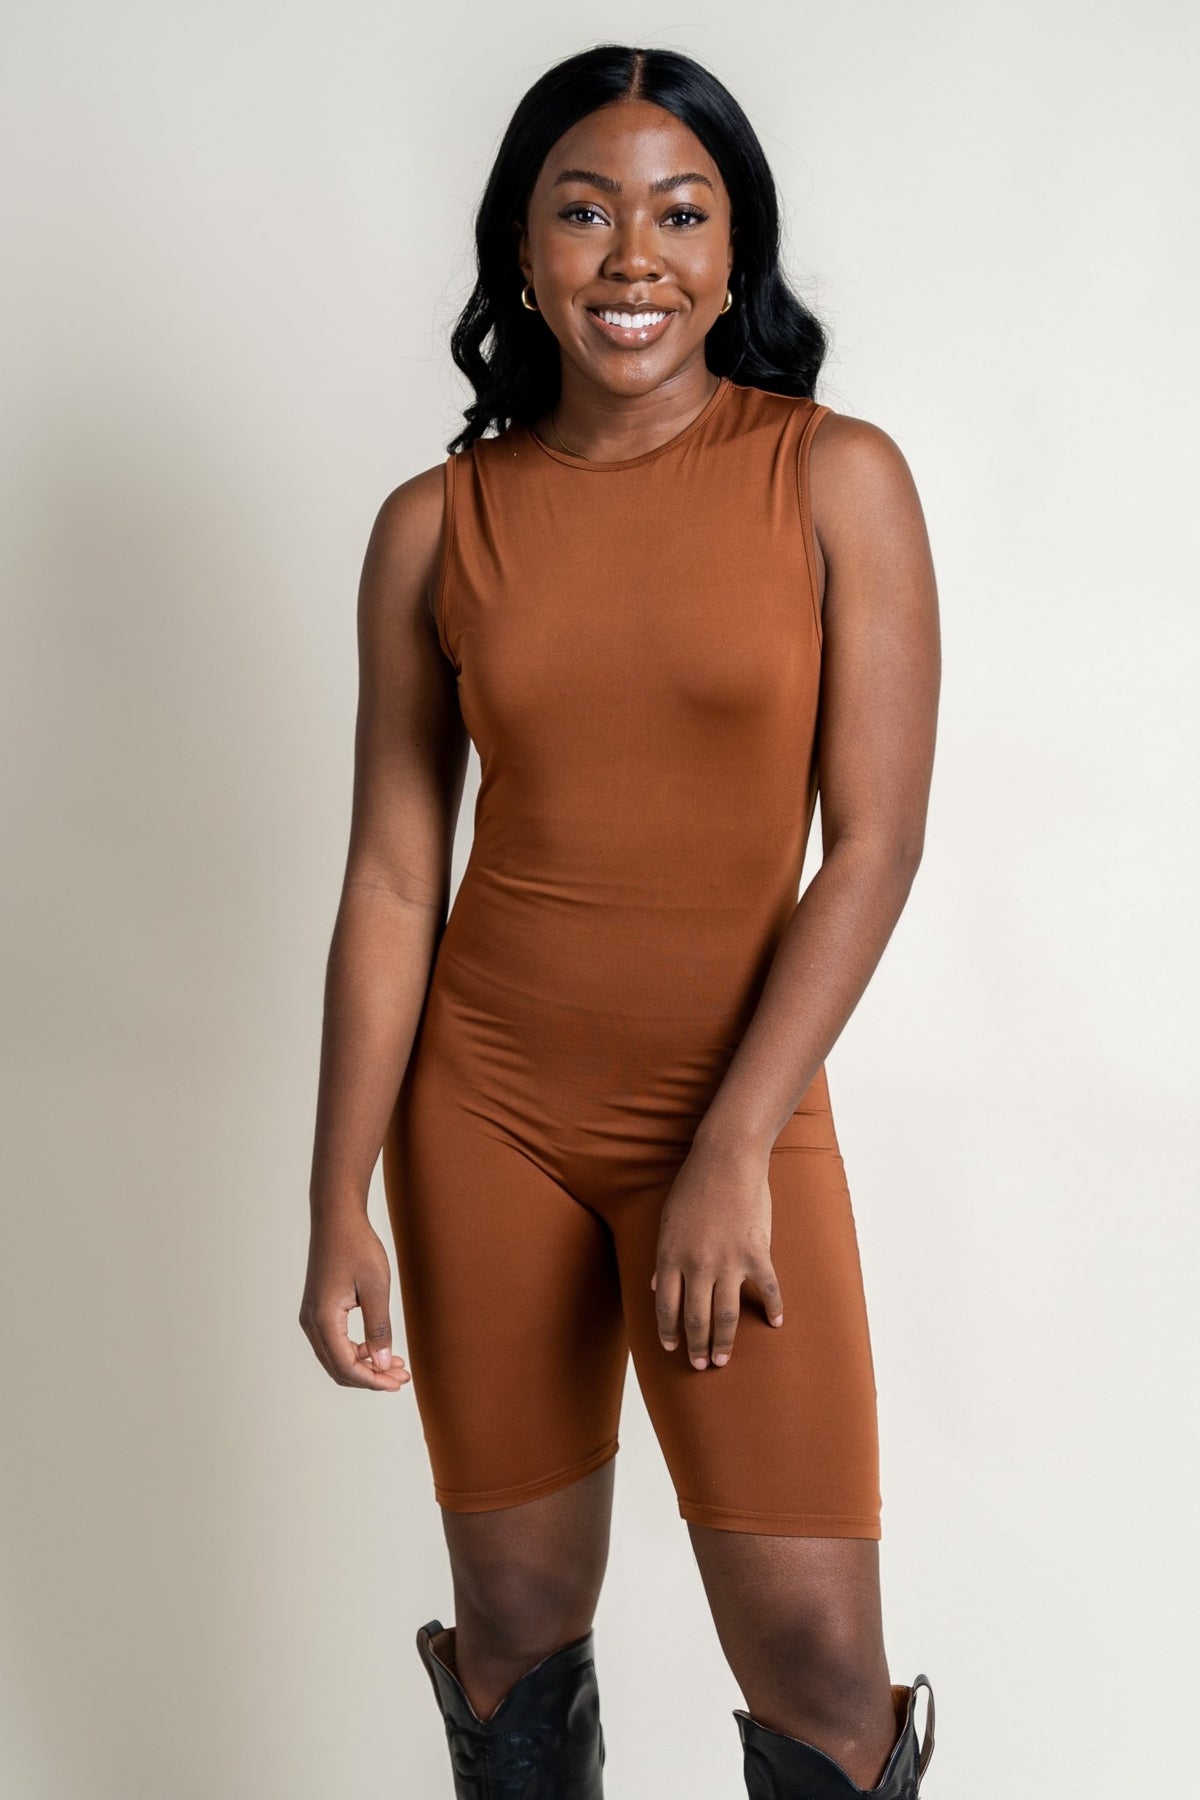 Zip back biker romper brown - Cute Romper - Trendy Rompers and Pantsuits at Lush Fashion Lounge Boutique in Oklahoma City